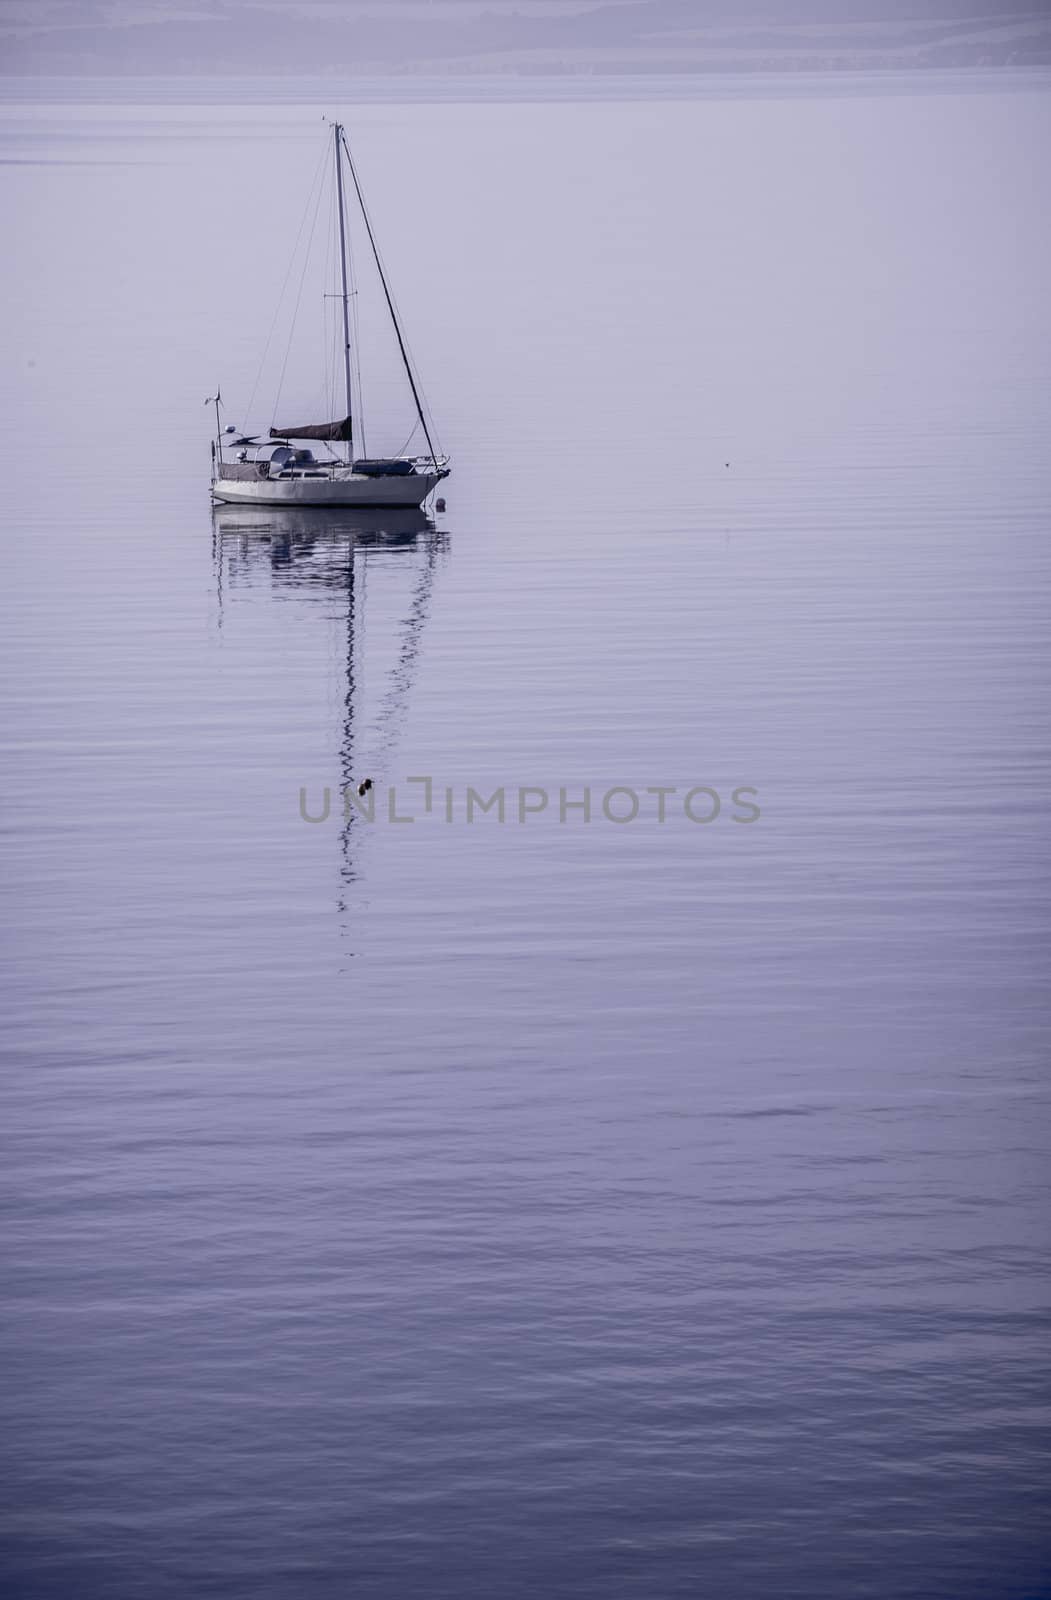 Lone yacht sitting moored in the beautiful still water at sunrise